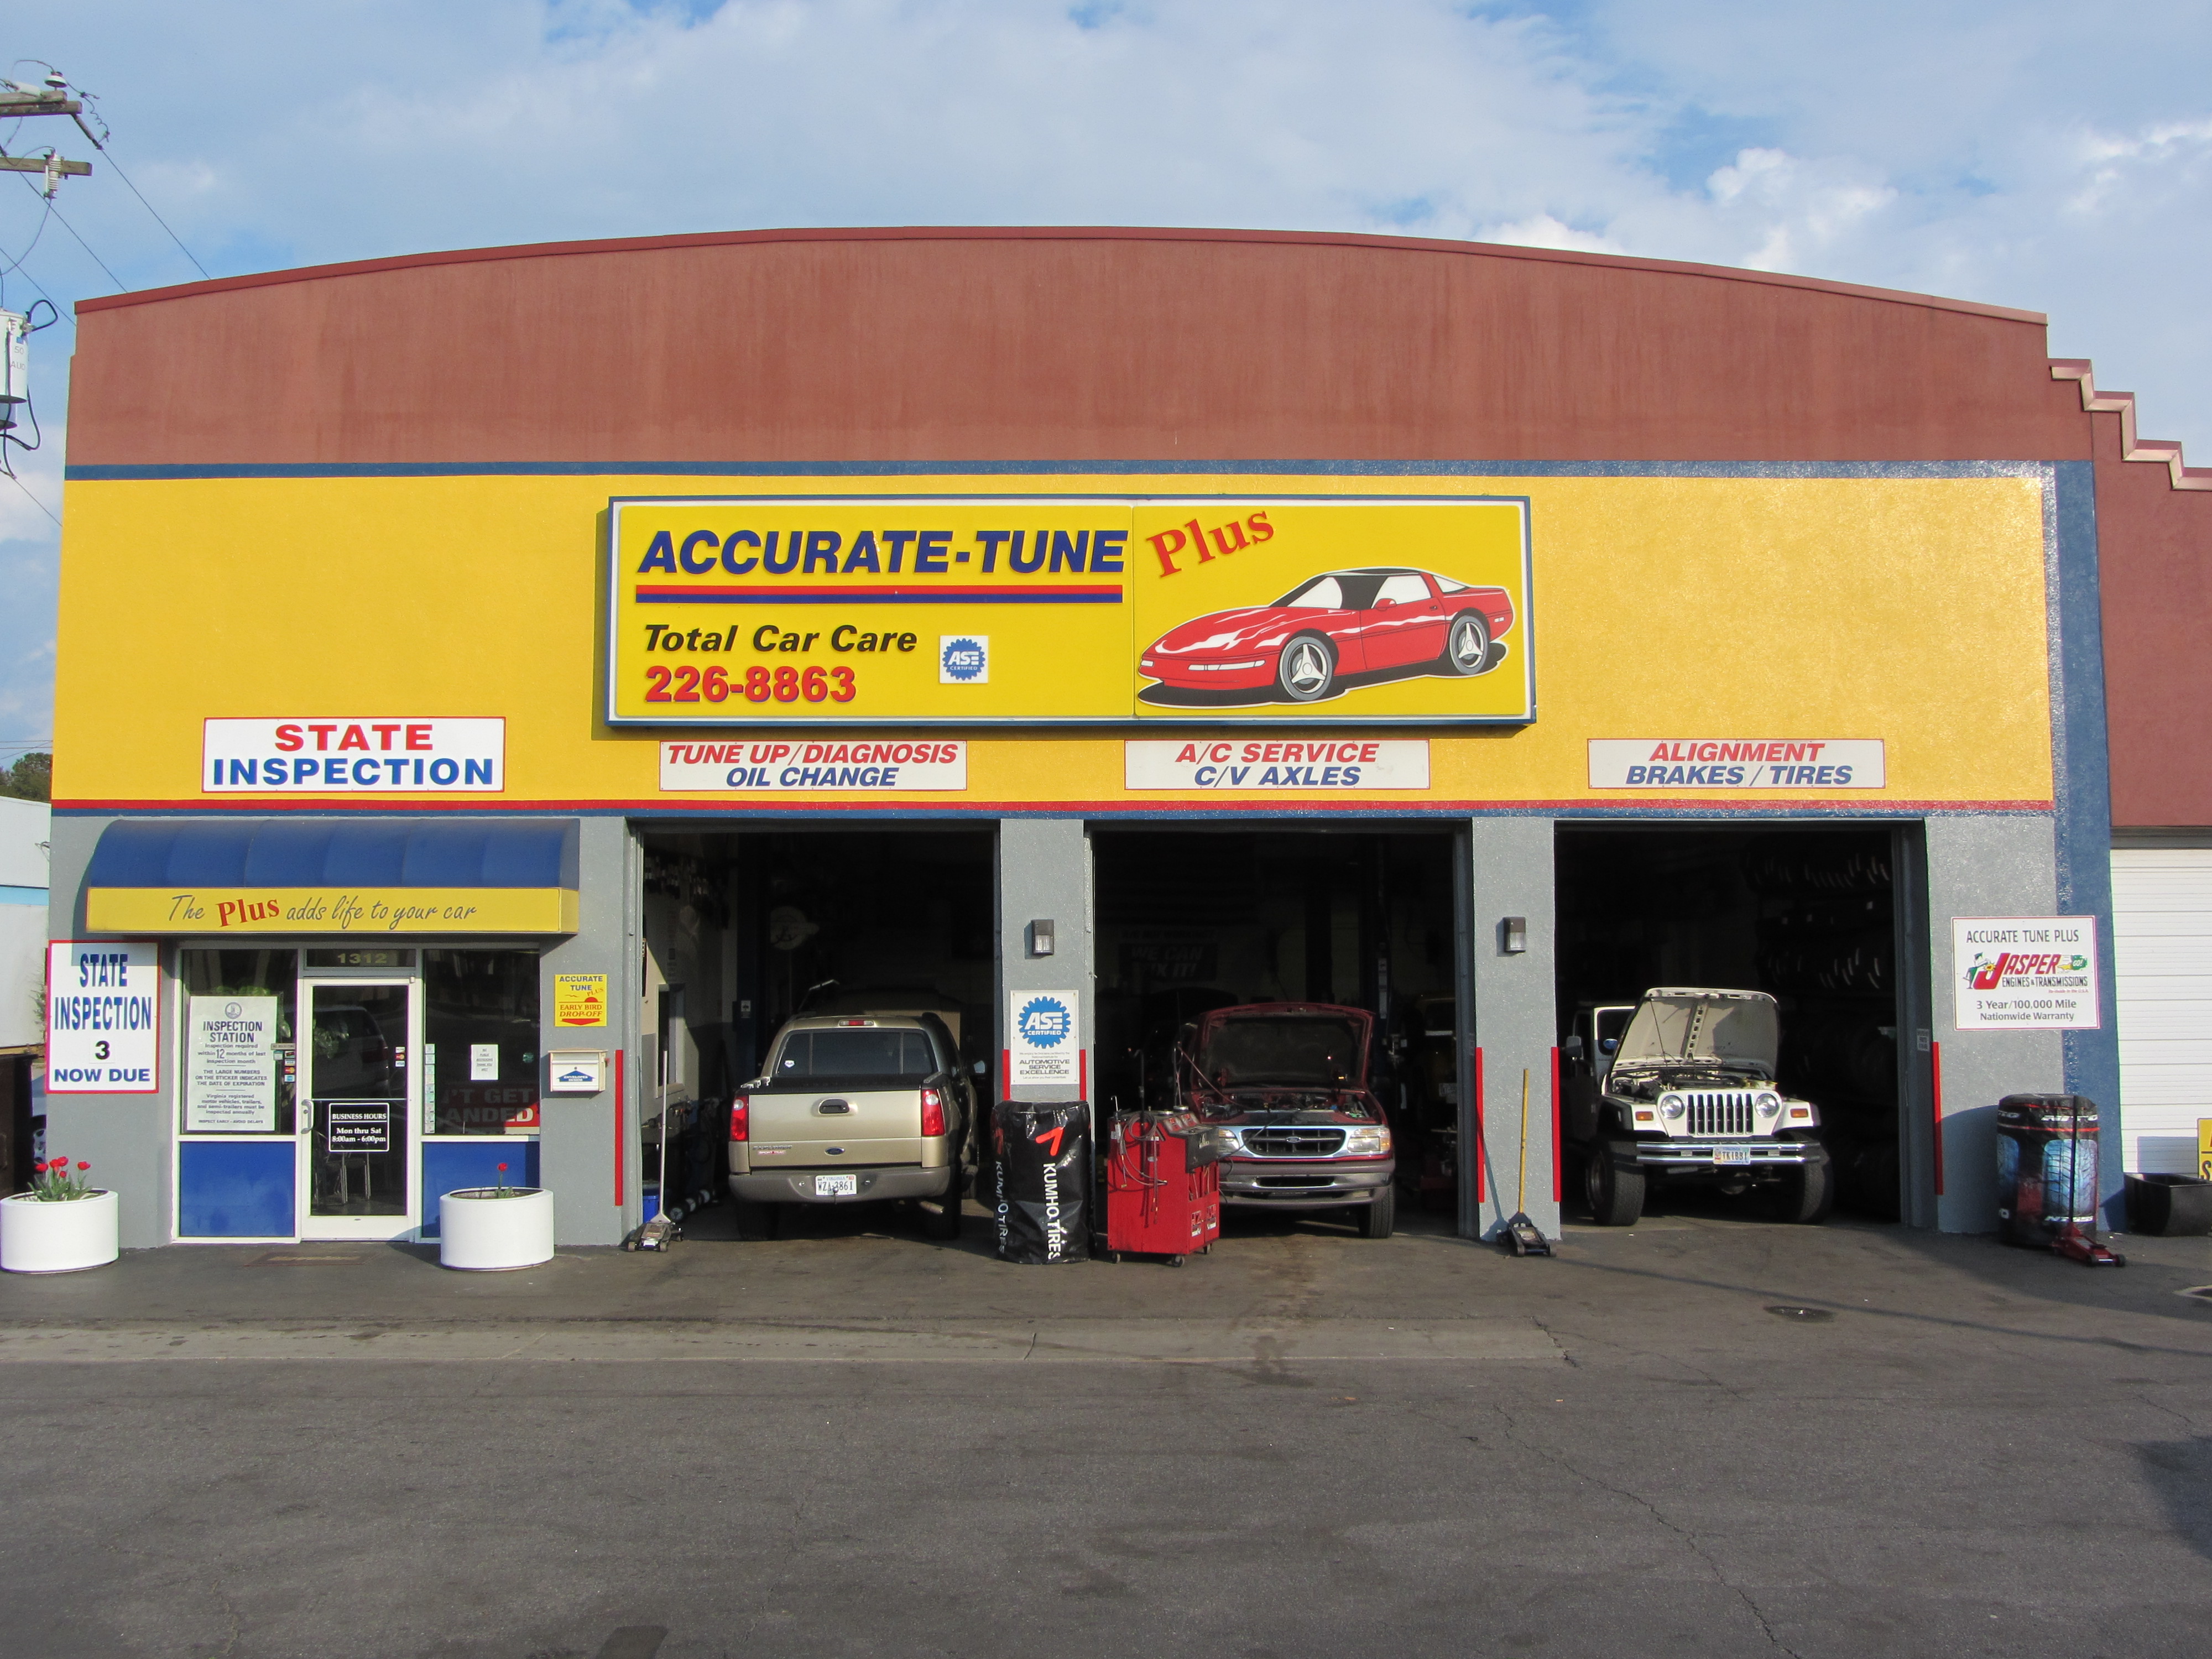 Our Downtown Norfolk Store - Monticello - Accurate Tune Plus